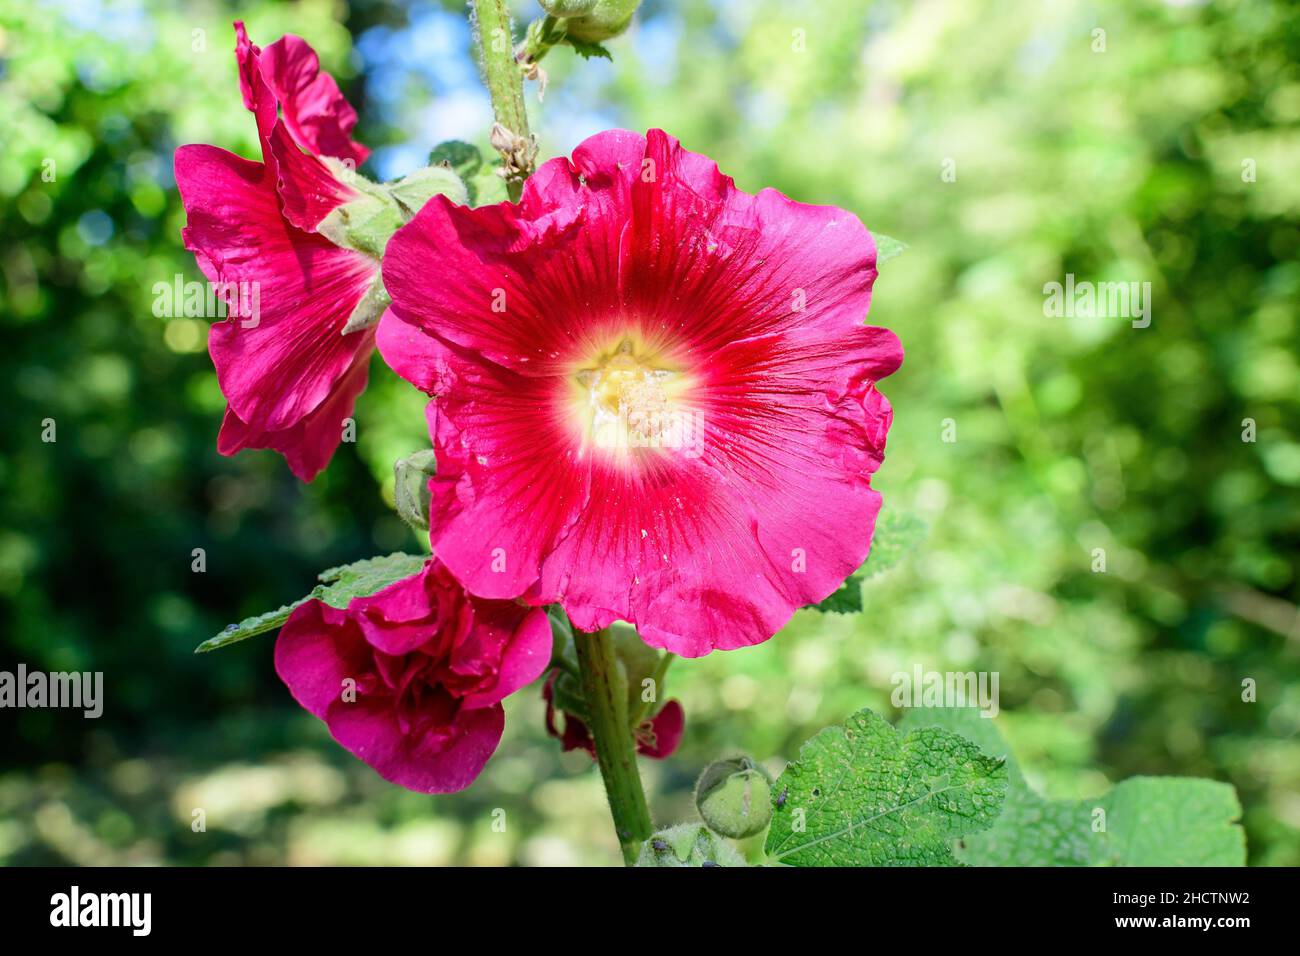 One delicate pink magenta flower of Althaea officinalis plant, commonly known as marsh-mallow in a British cottage style garden in a sunny summer day, Stock Photo